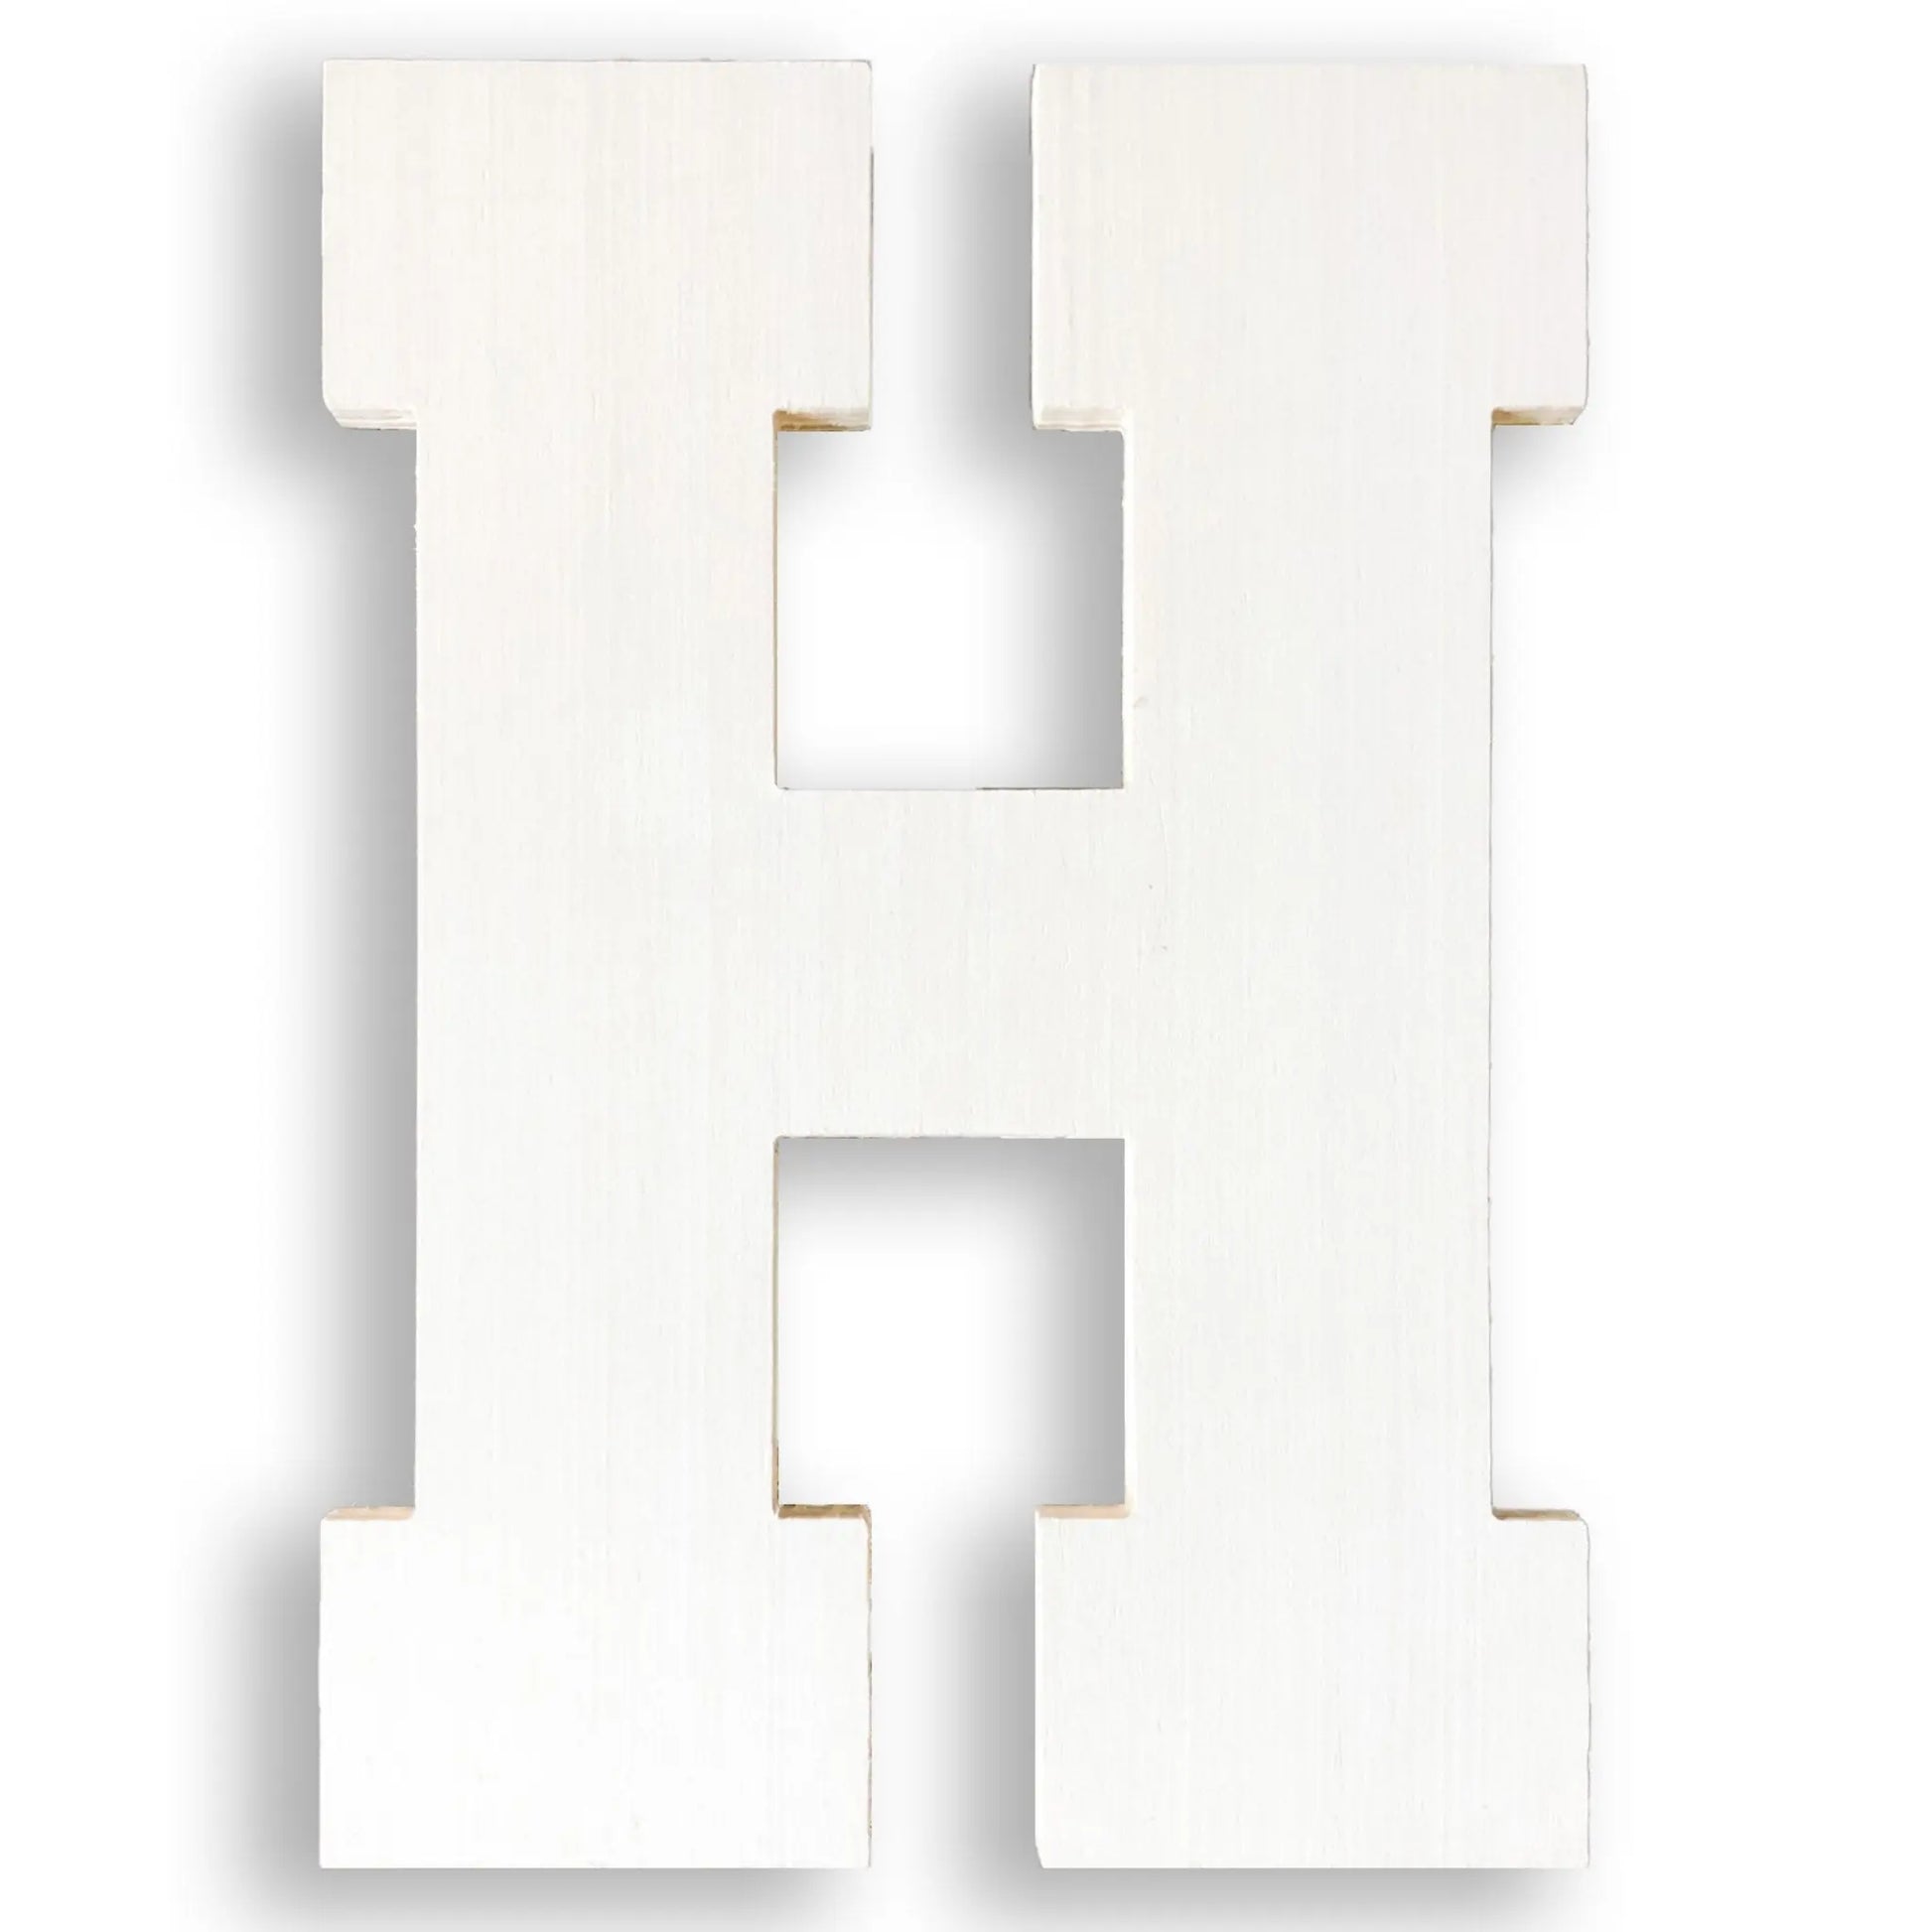 3 Inch Wood Letters 